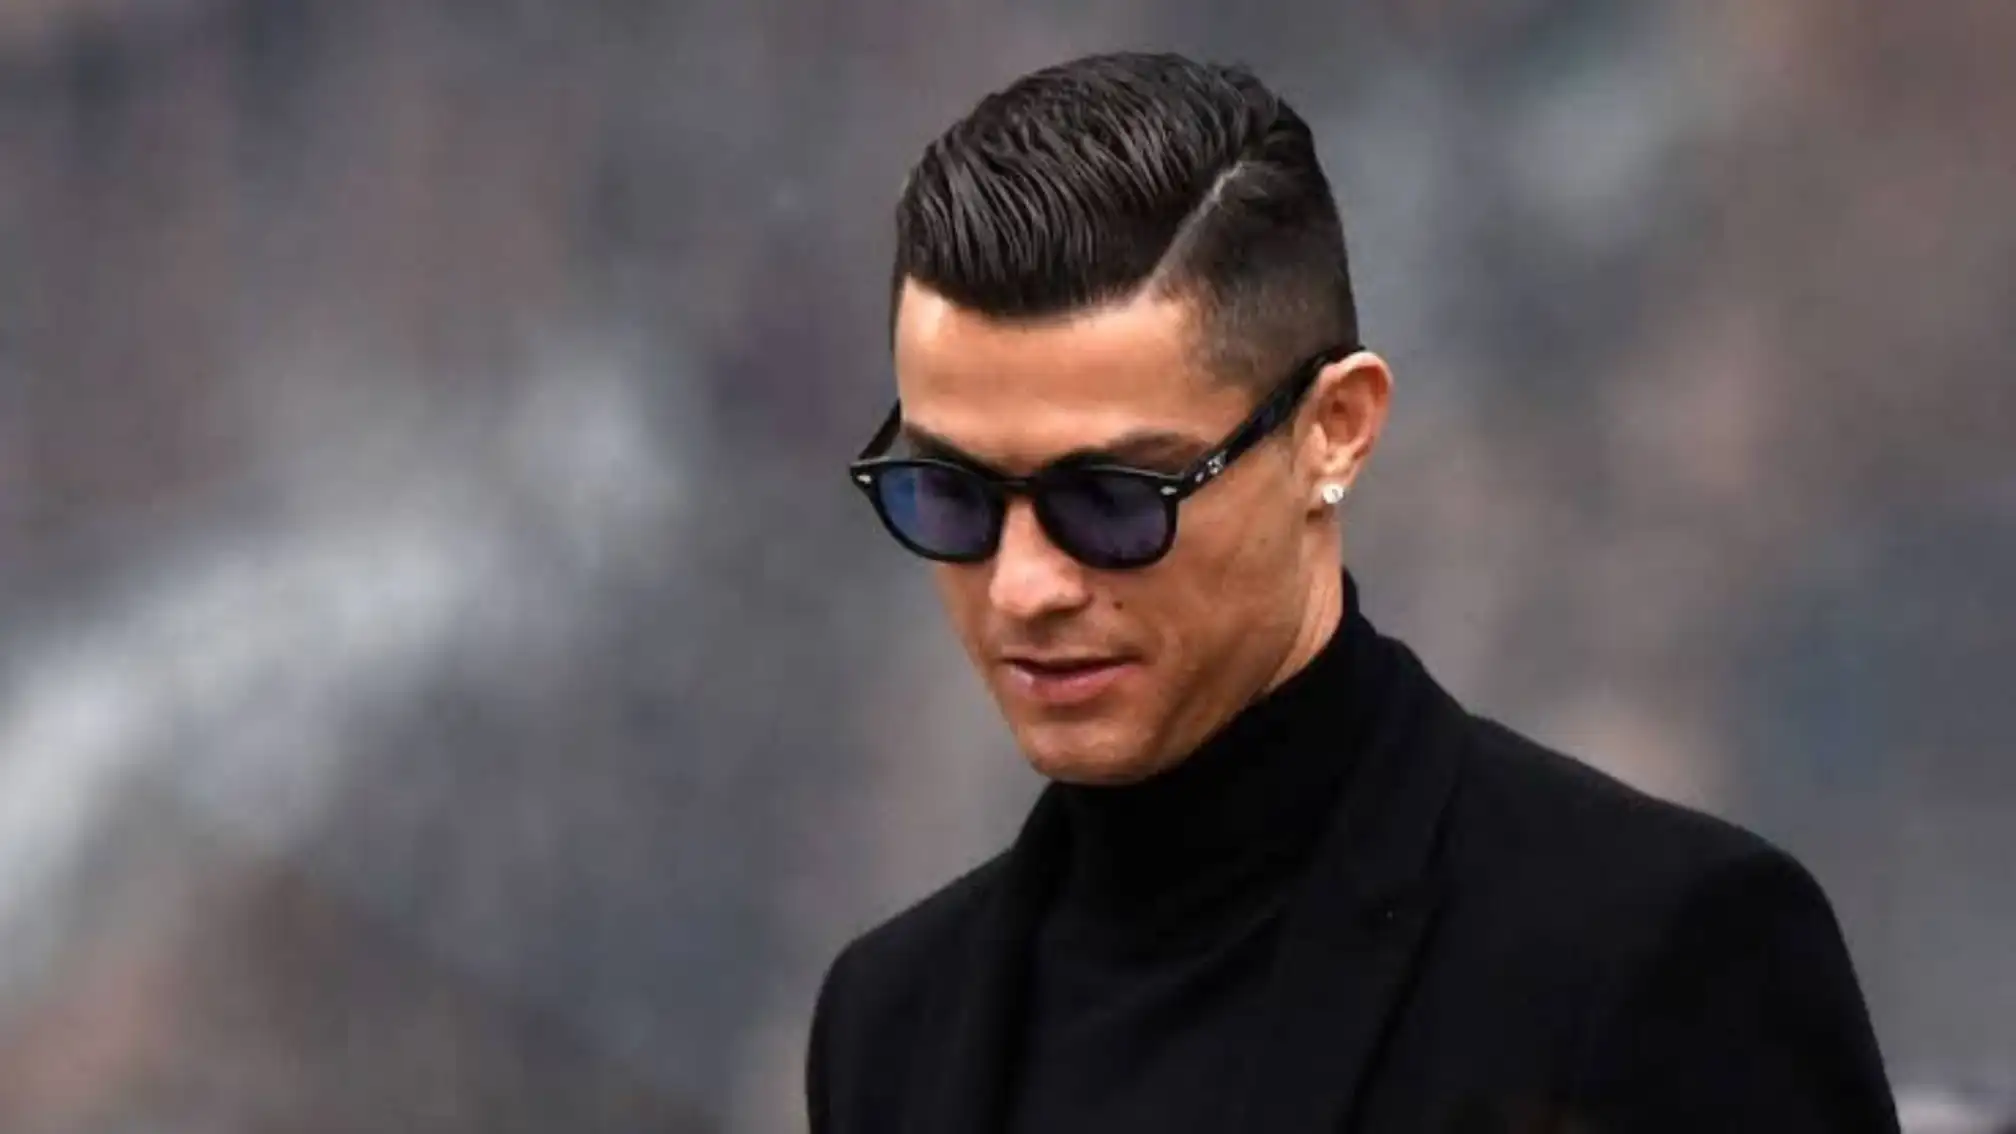 Kathryn Mayorga's sexual assault lawsuit against Cristiano Ronaldo dismissed by judge